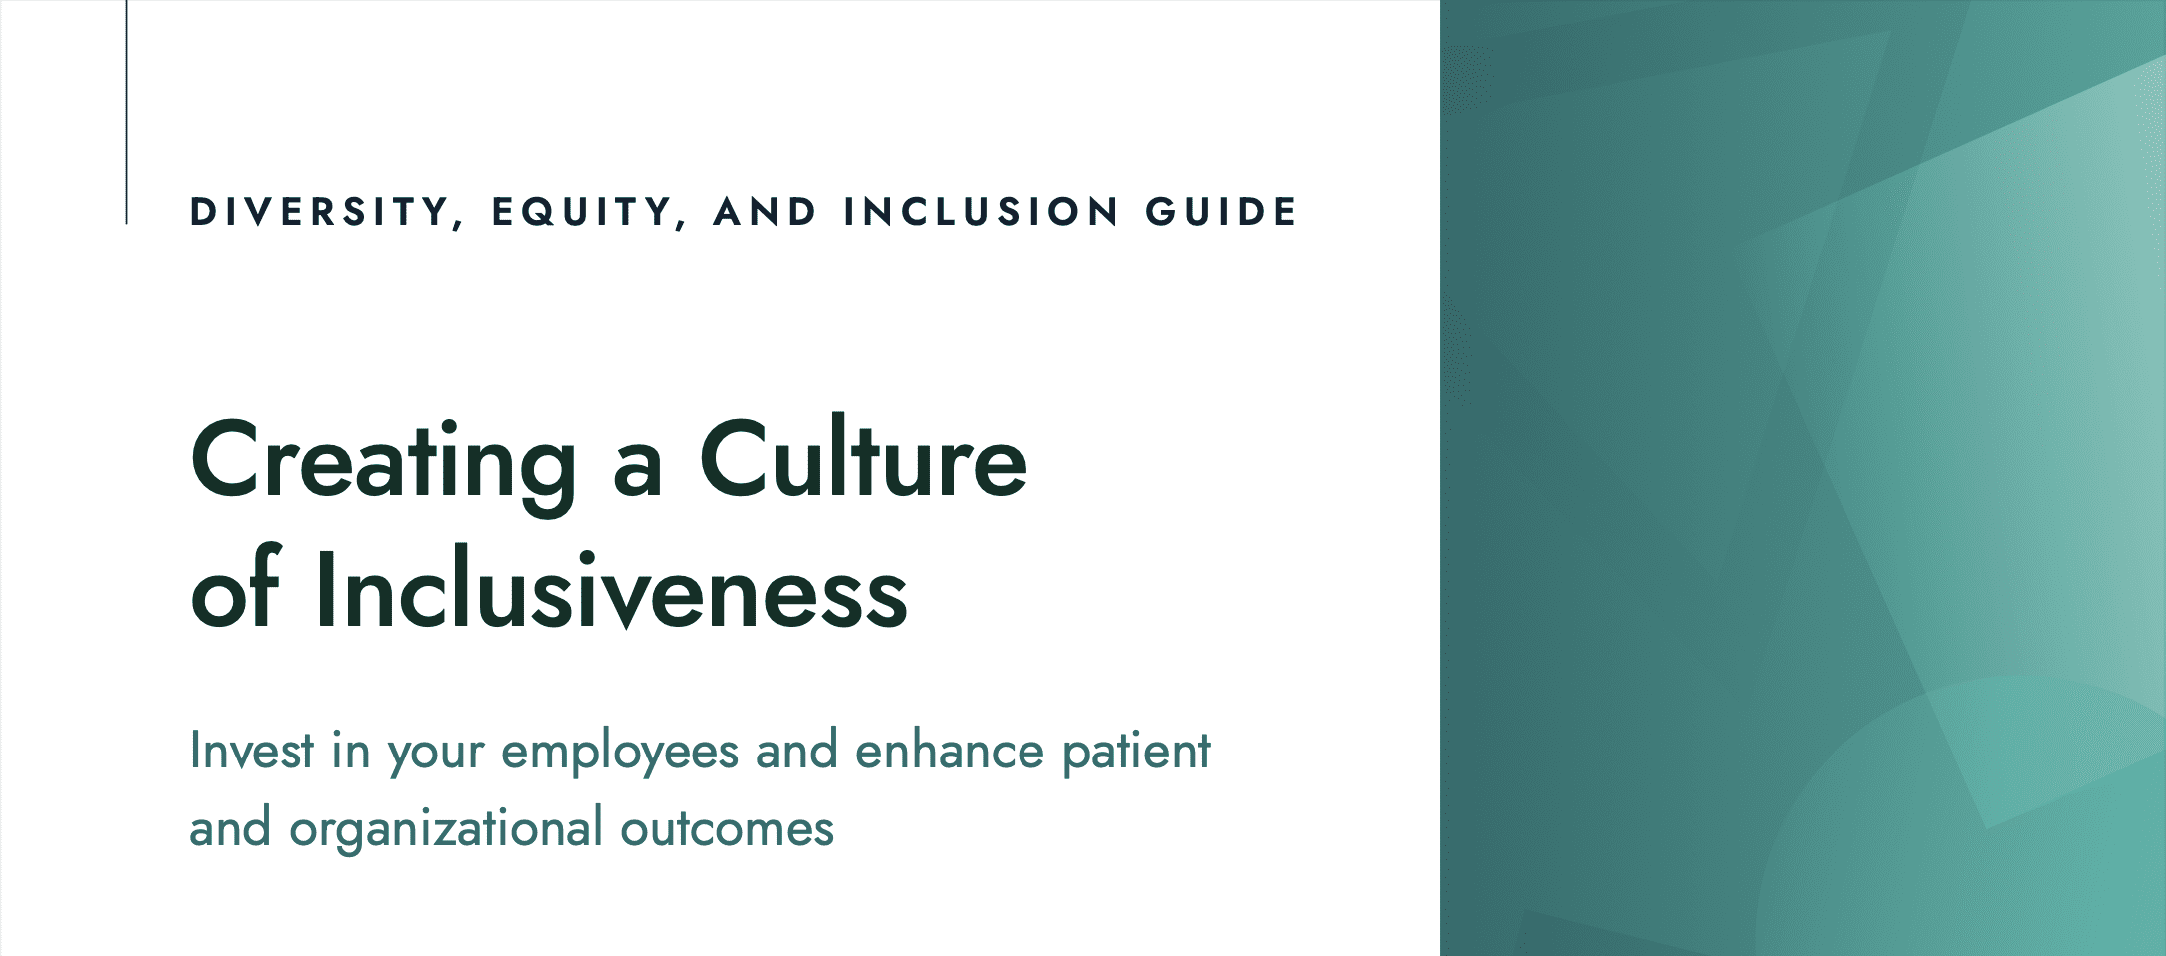 Creating a Culture of Inclusiveness eBook cover image